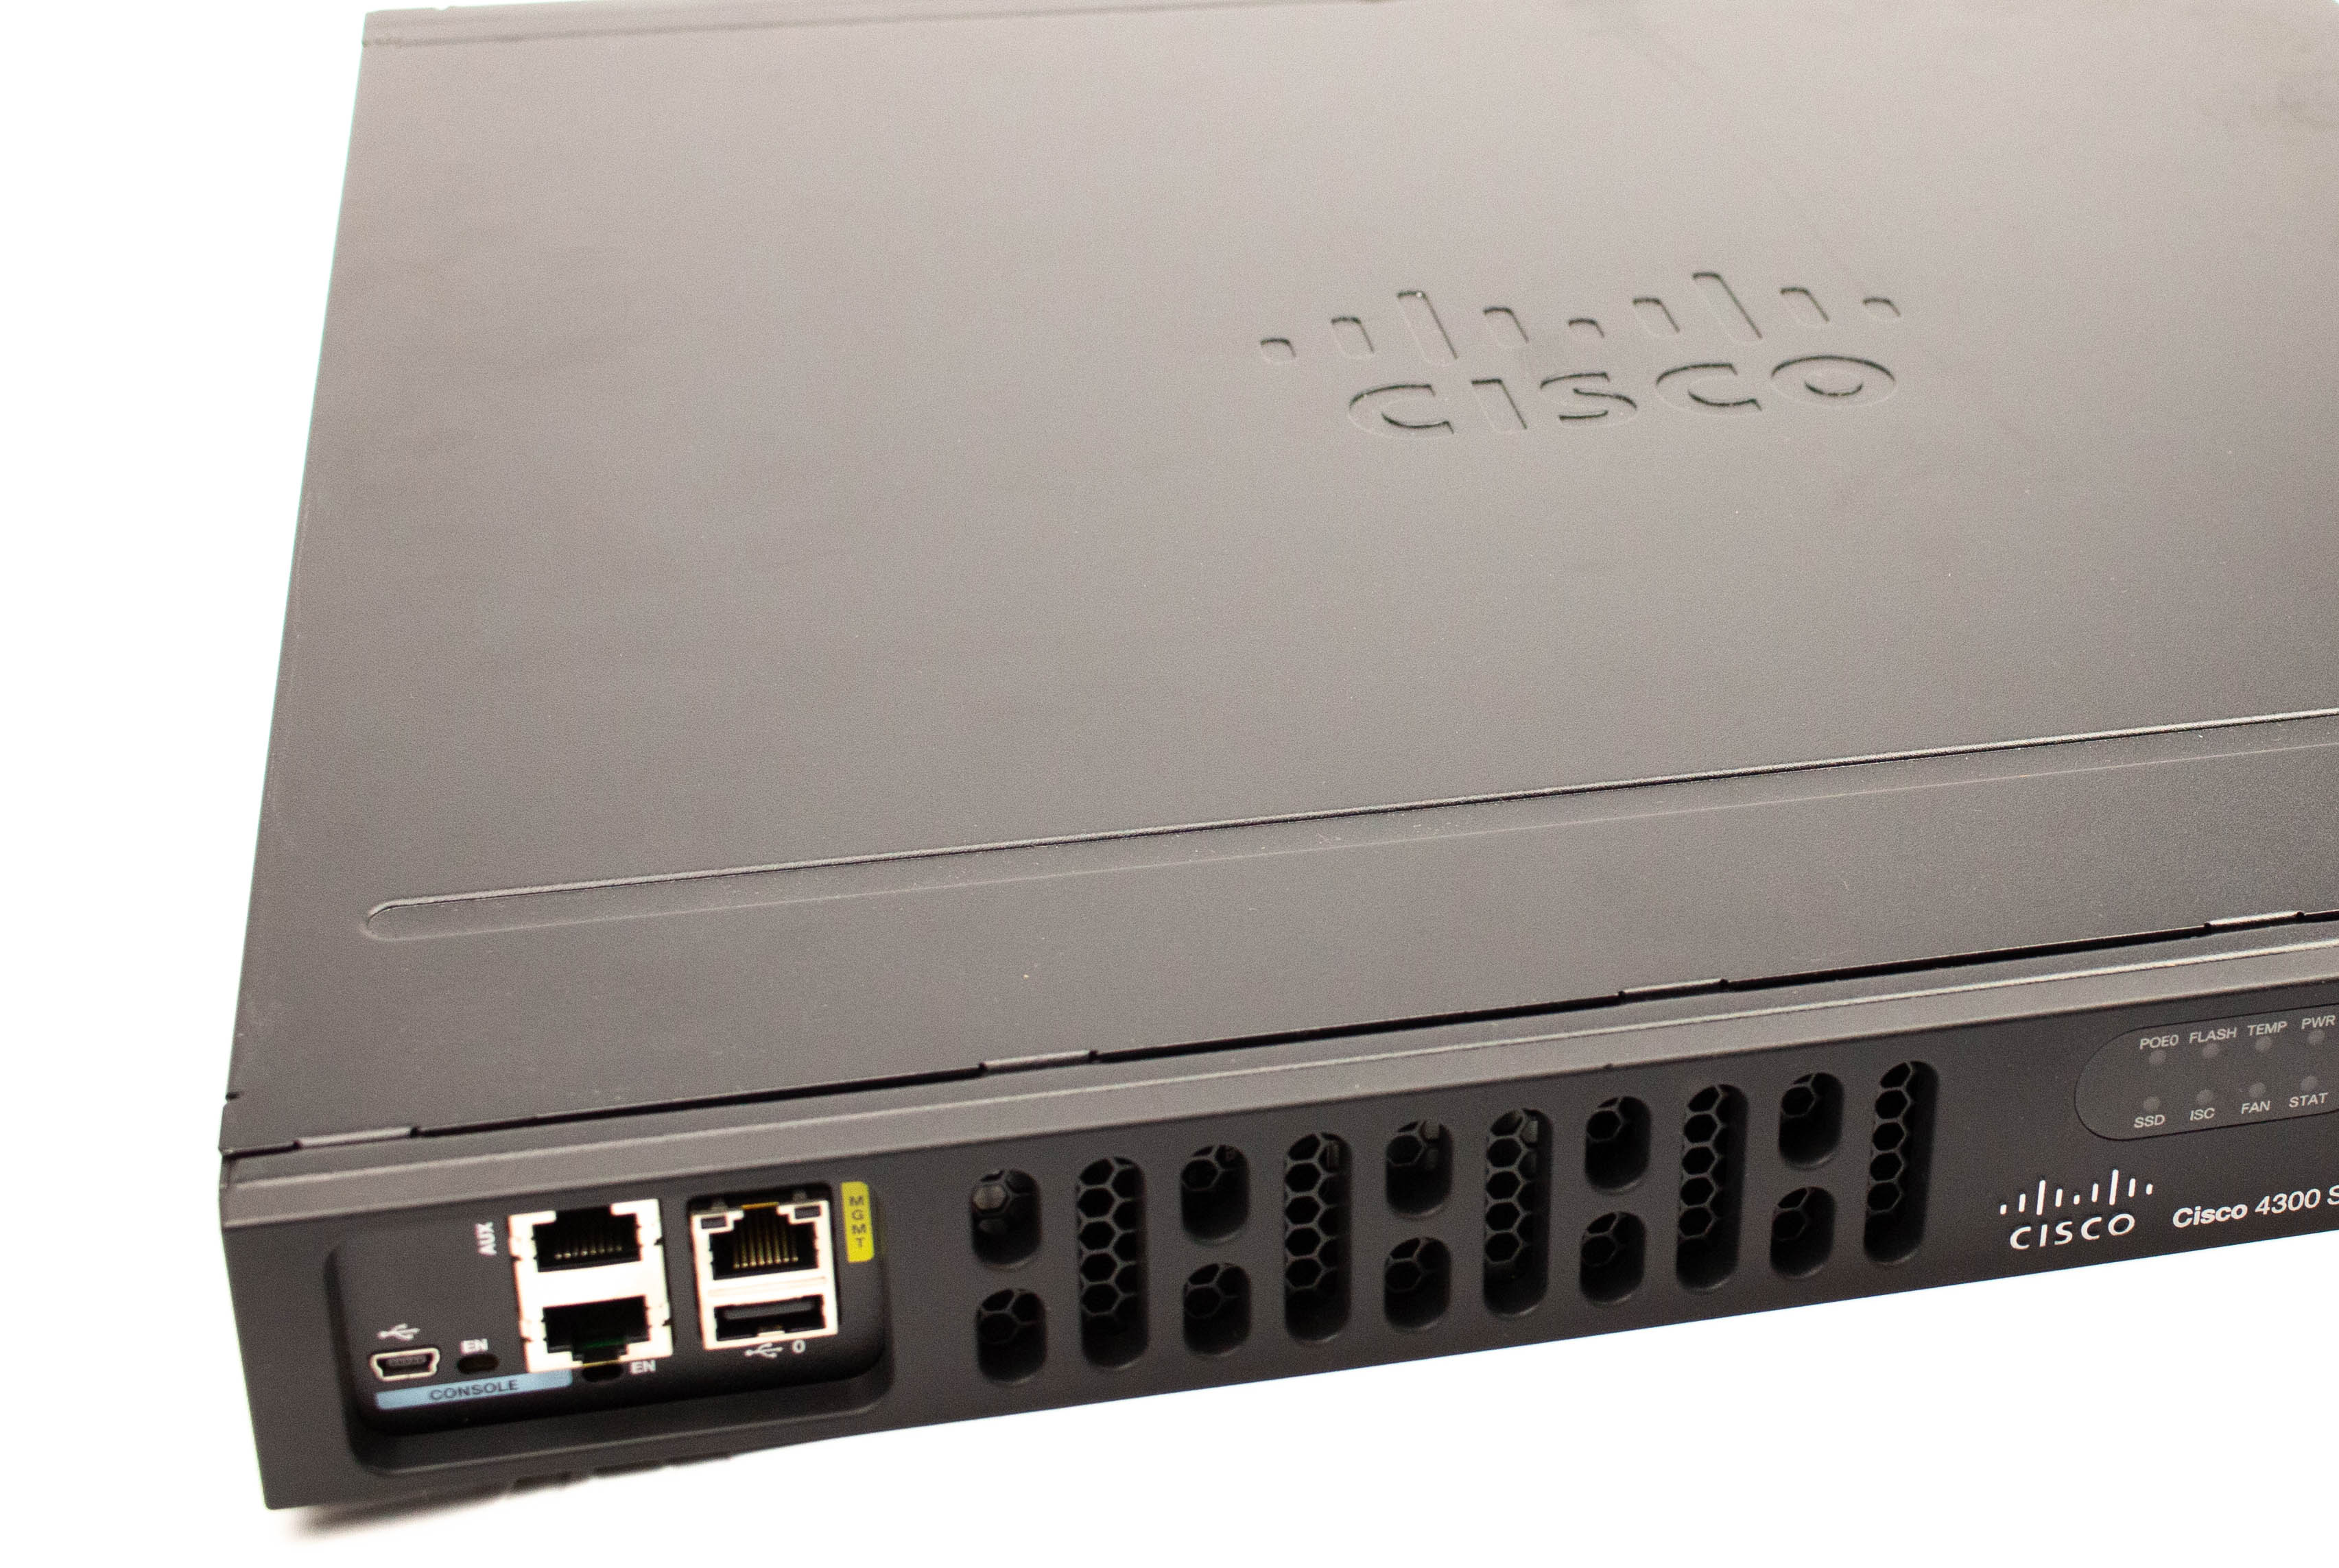 Cisco ISR 4000 Series Routers